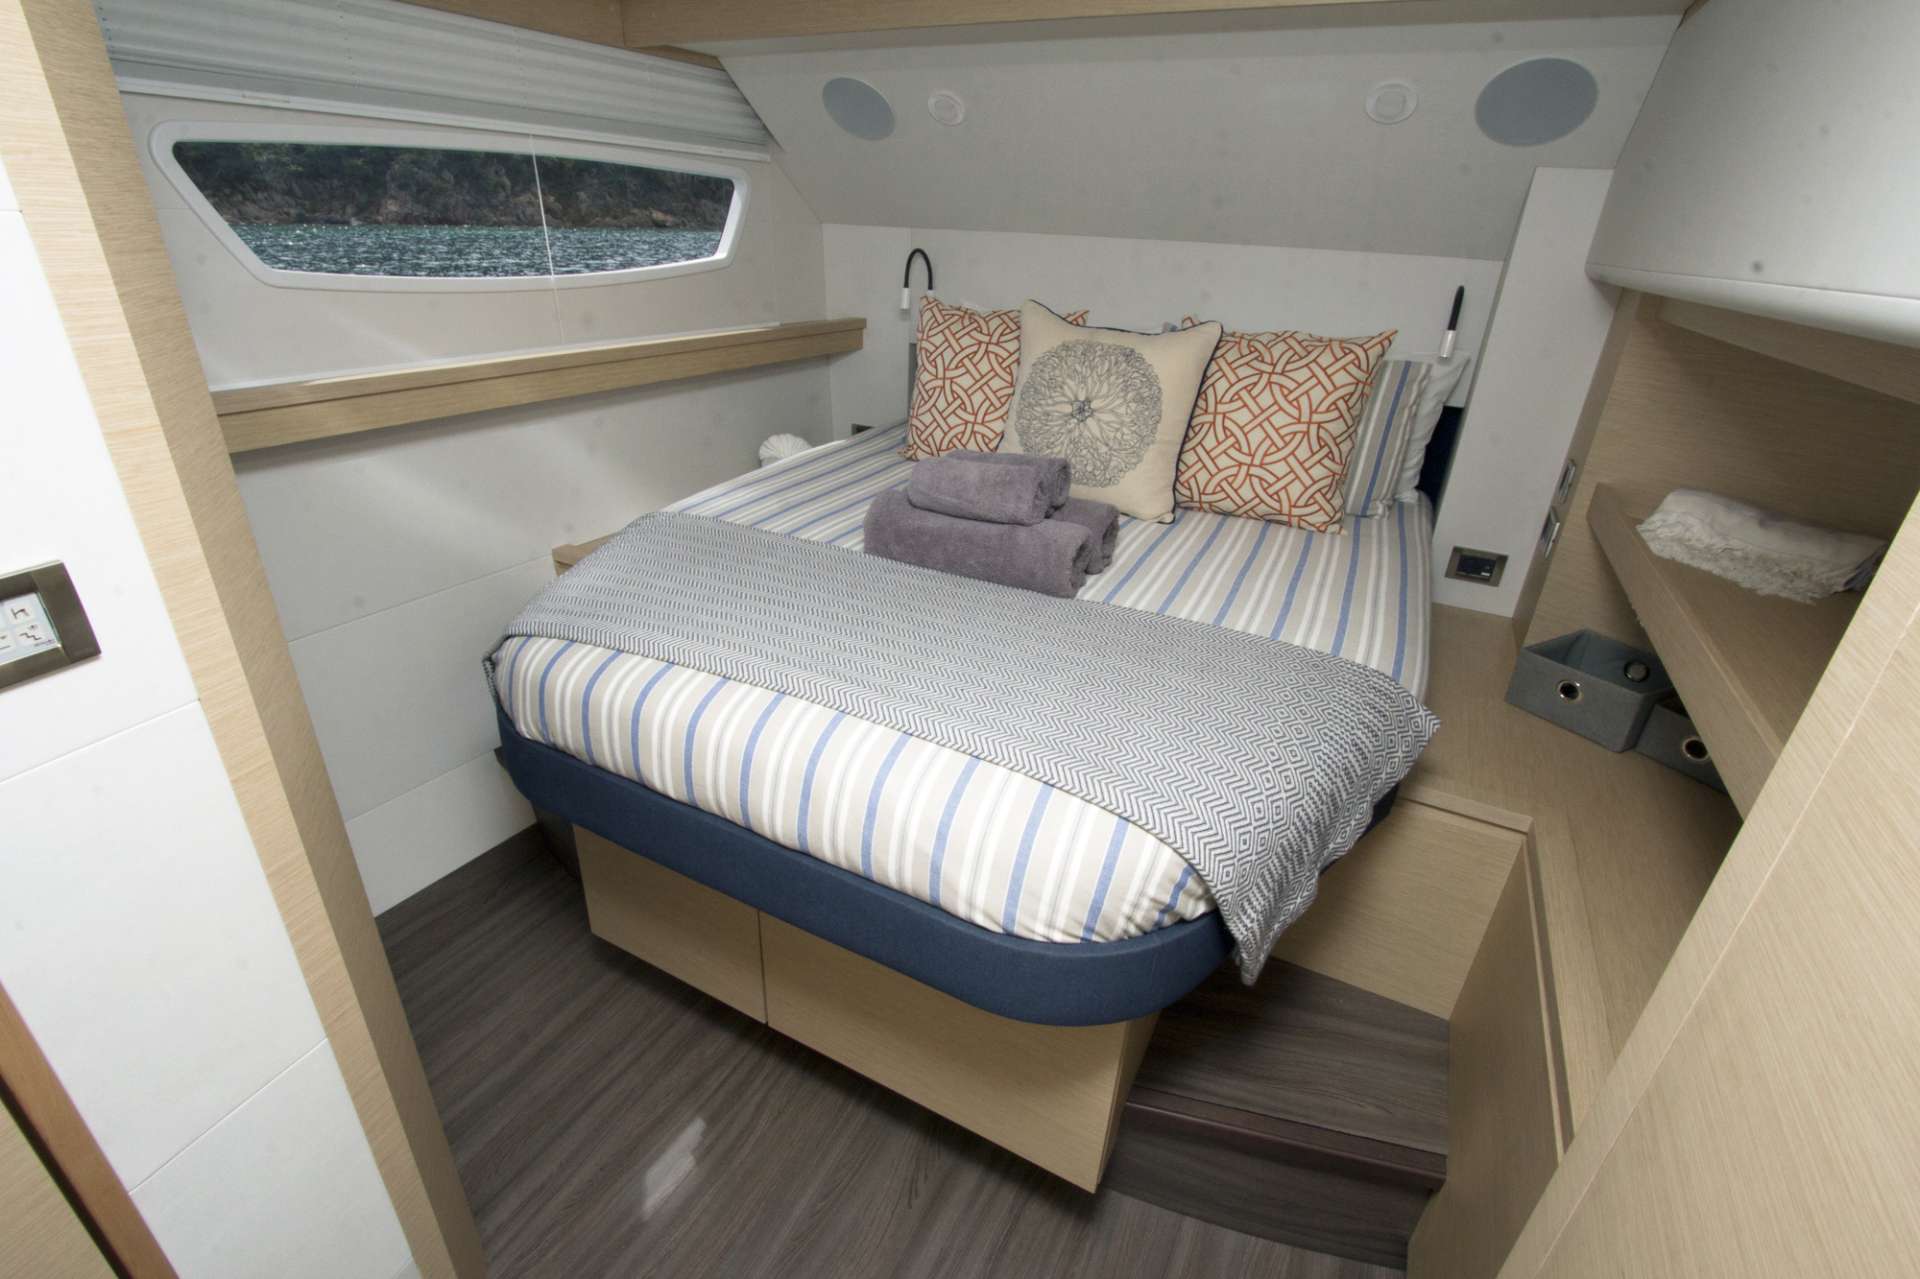 Catamaran Yacht 'NENNE' Guest Cabin, 10 PAX, 3 Crew, 67.00 Ft, 20.00 Meters, Built 2017, Fountaine Pajot, Refit Year The latest, 2020 electronics and equipment onboard. New larger tender June 2019